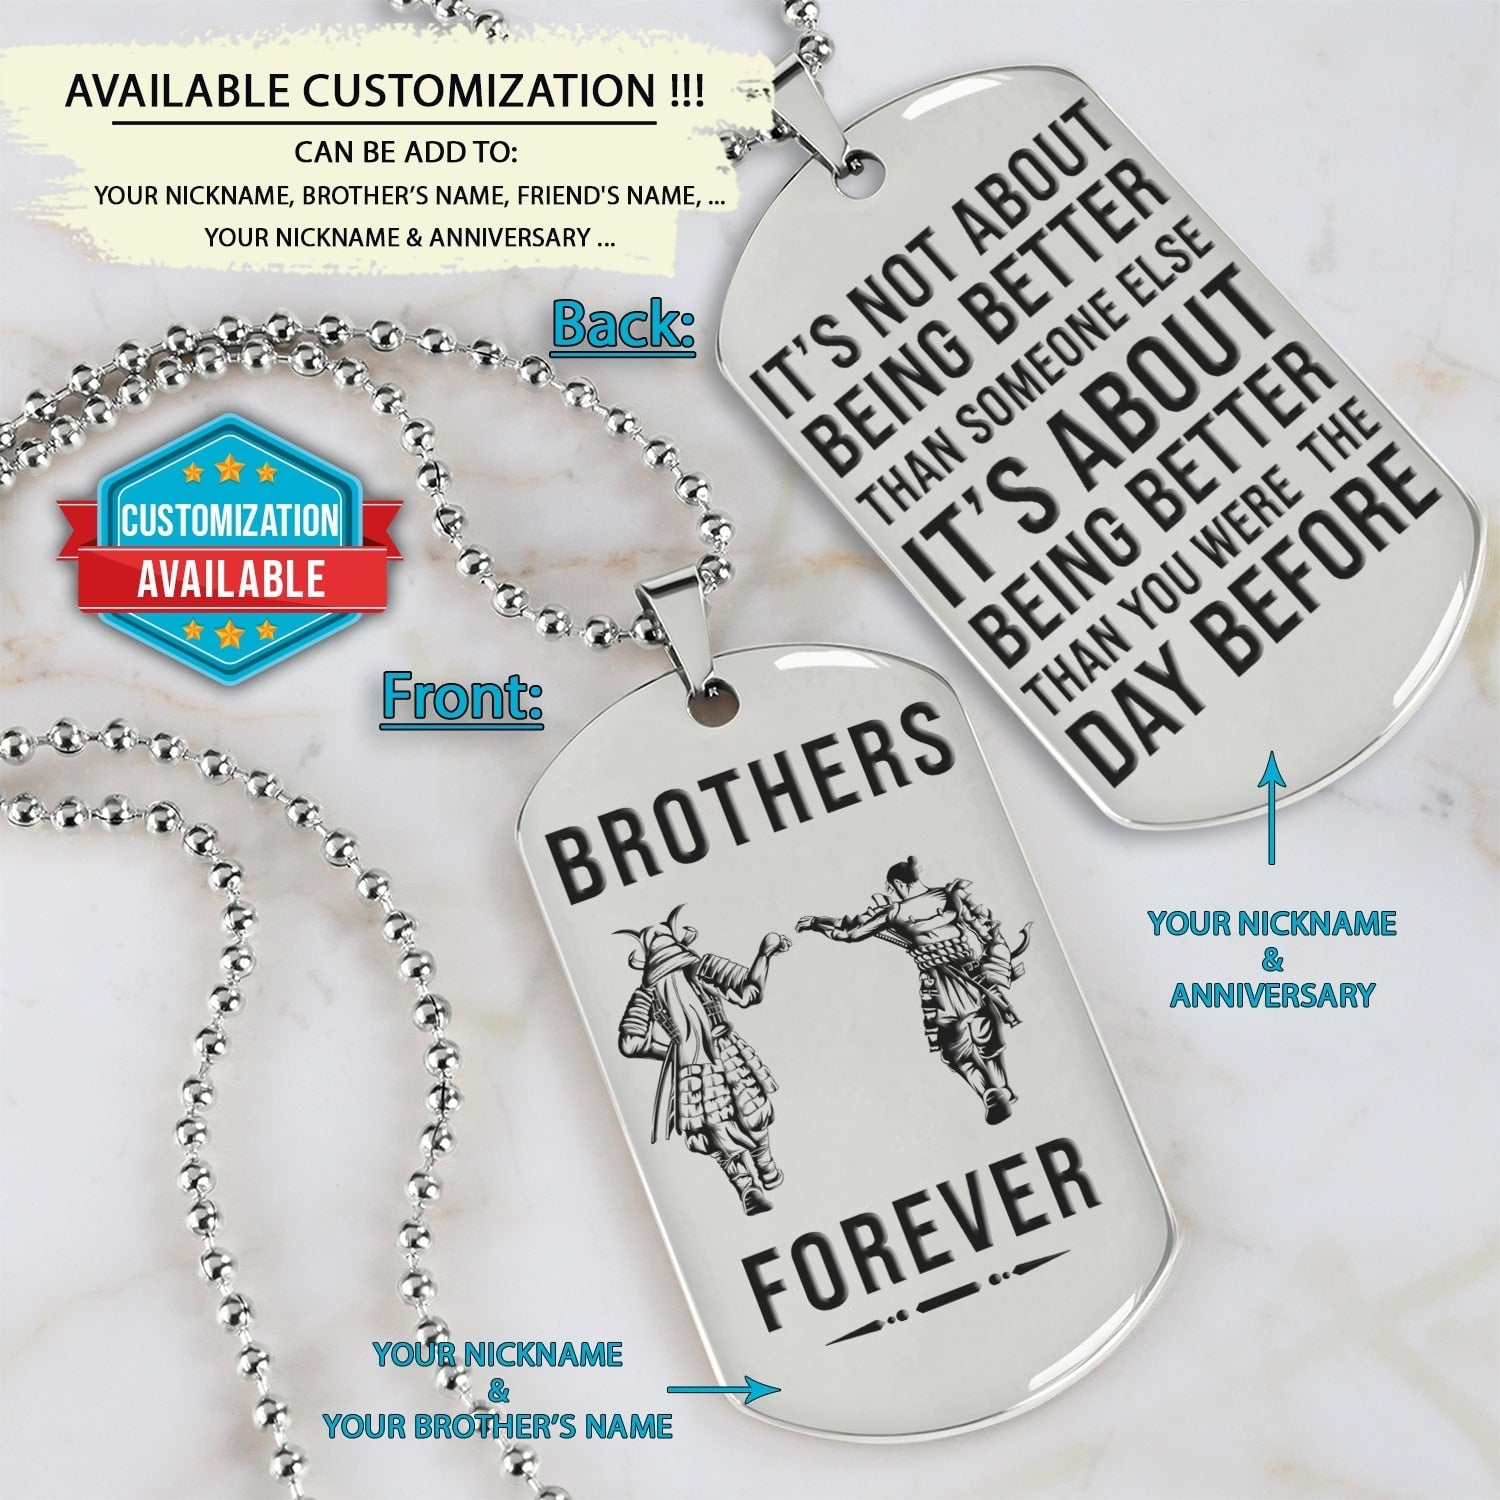 SAD056 - Brothers Forever - It's About Being Better Than You Were The Day Before - Samurai - Bushido - Katana - Ronin - Miyamoto Musashi - Silver Double-Sided Dog Tag